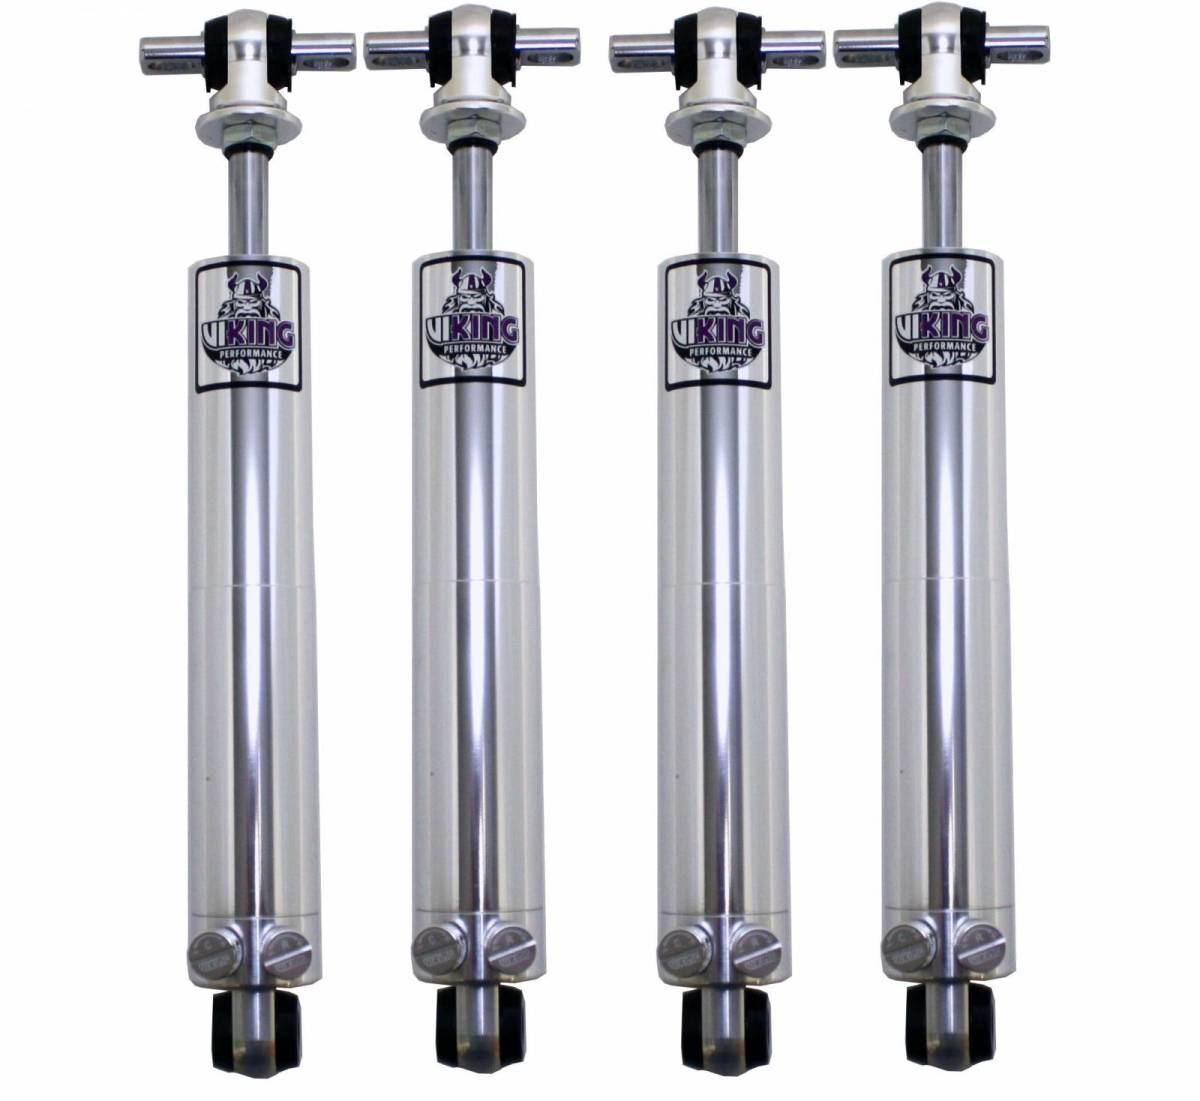 1962-1972 Mopar B, 1970-1974 E Body, 1957-1961 Plymouth Full Size - Viking Voyager 4 Pack Smooth Bodied Shock Absorber Set - VSK317 - Kanter Auto